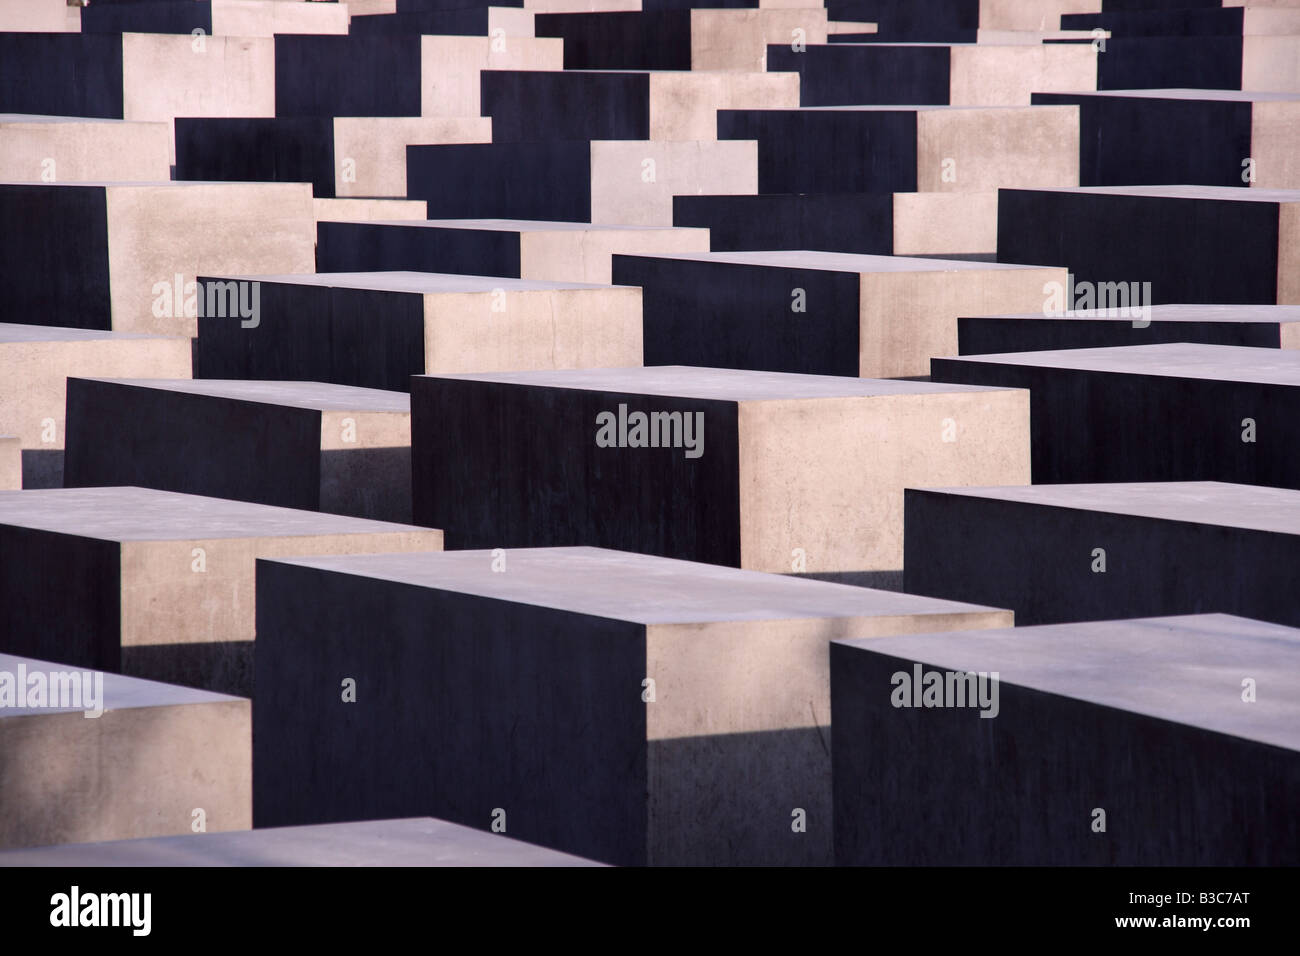 Germany, Berlin. The Memorial to the Murdered Jews of Europe, also known as the Holocaust Memorial, is a memorial in Berlin to the Jewish victims of the Holocaust, designed by architect Peter Eisenman and engineers Buro Happold. Stock Photo